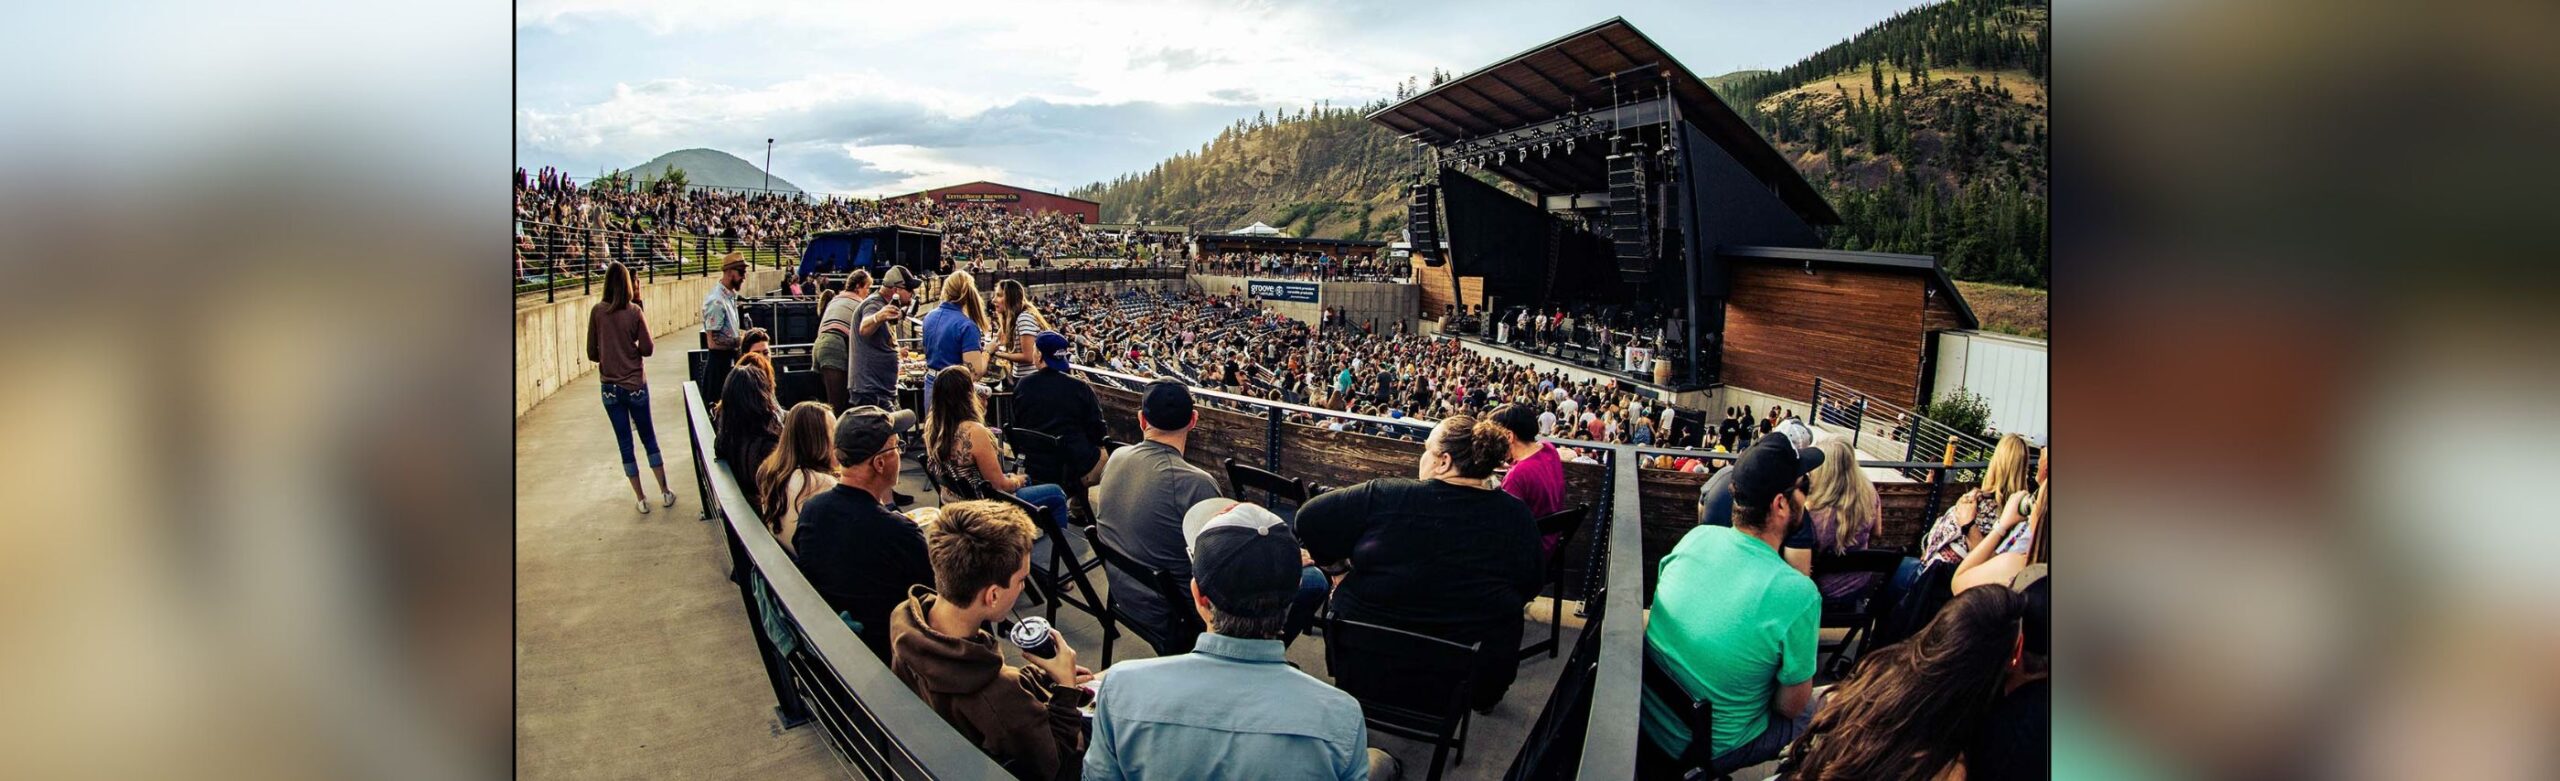 Now Available: Premium Box Seats for Greensky Bluegrass with Molly Tuttle at KettleHouse Amphitheater Image